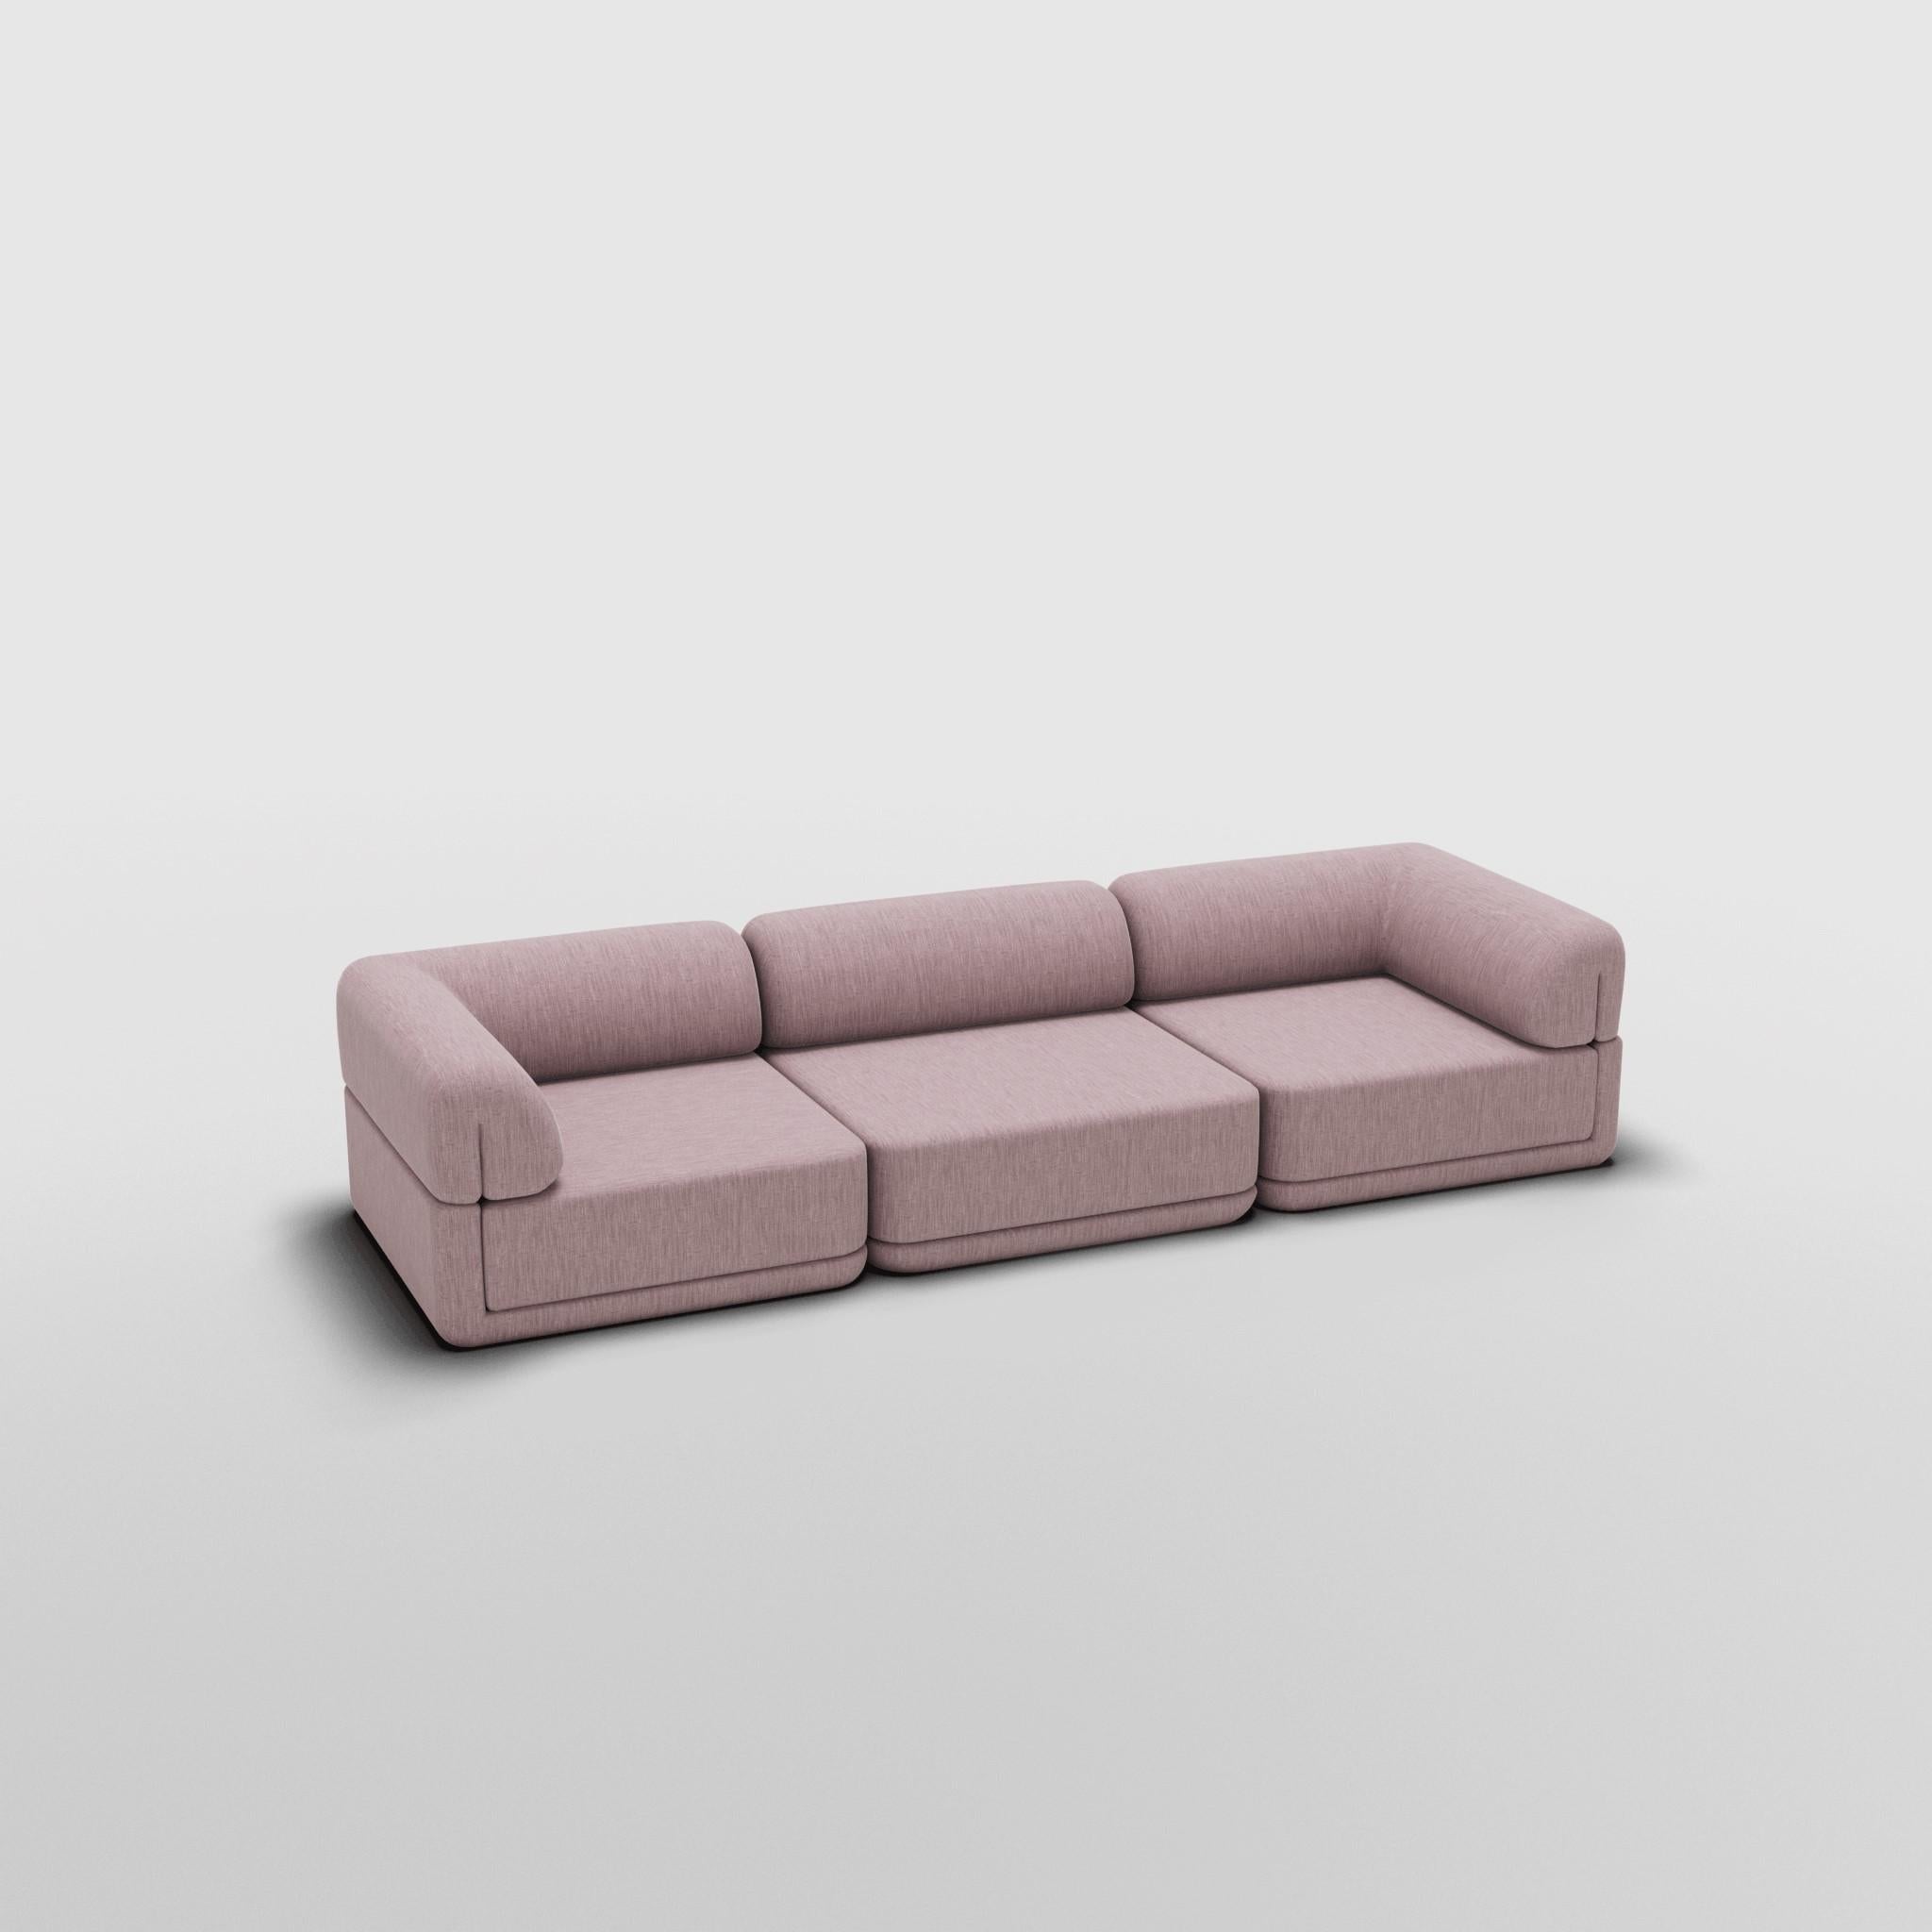 The Cube Sofa - Sofa Lounge Set In New Condition For Sale In Ontario, CA